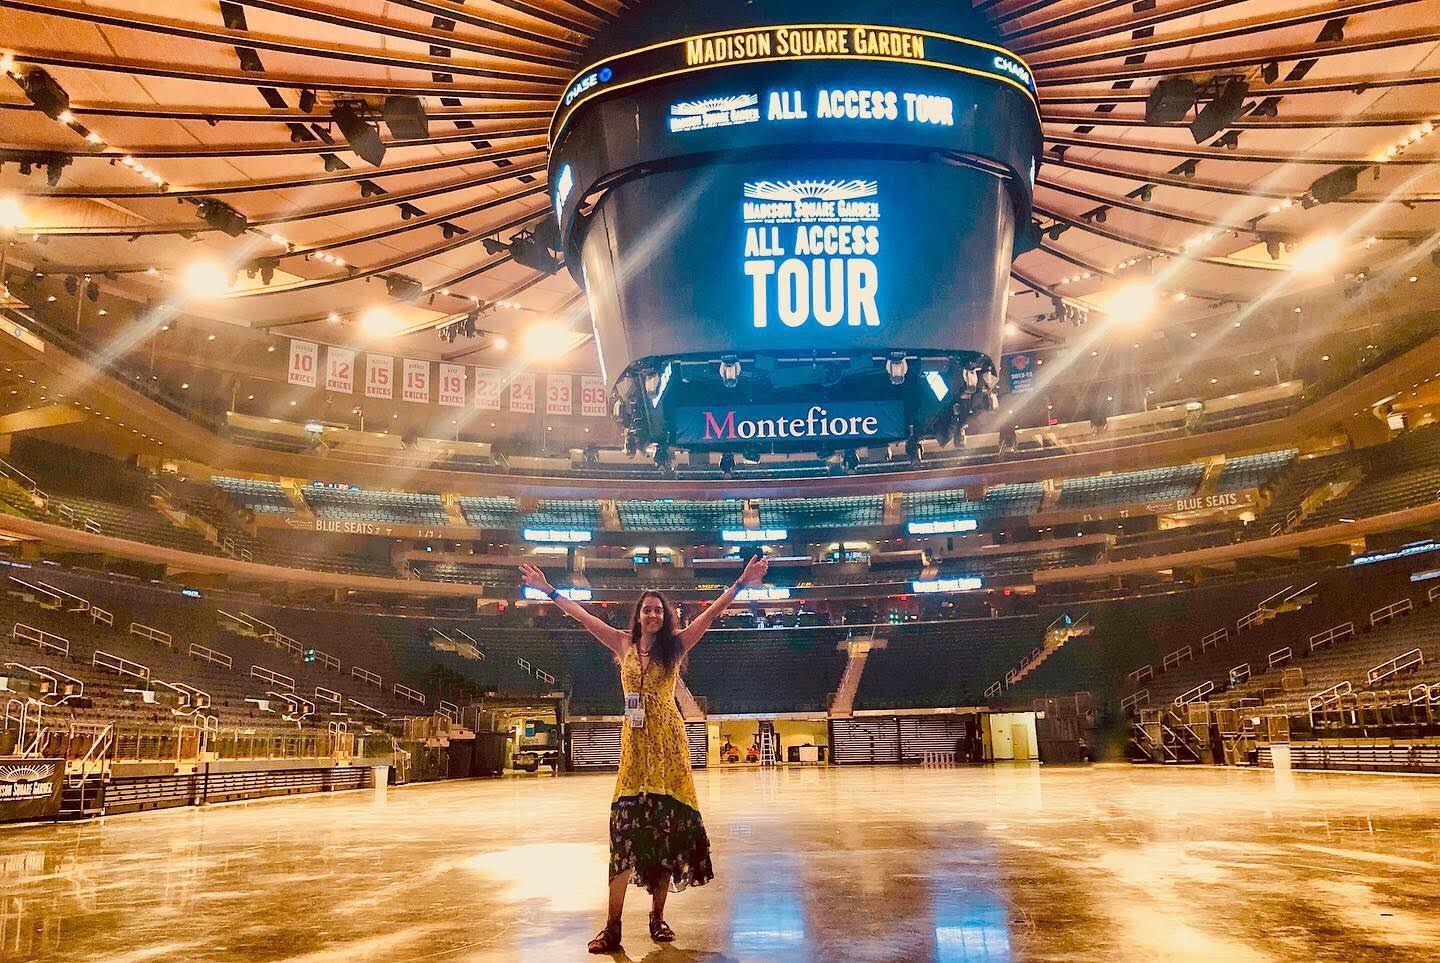 all access tour msg